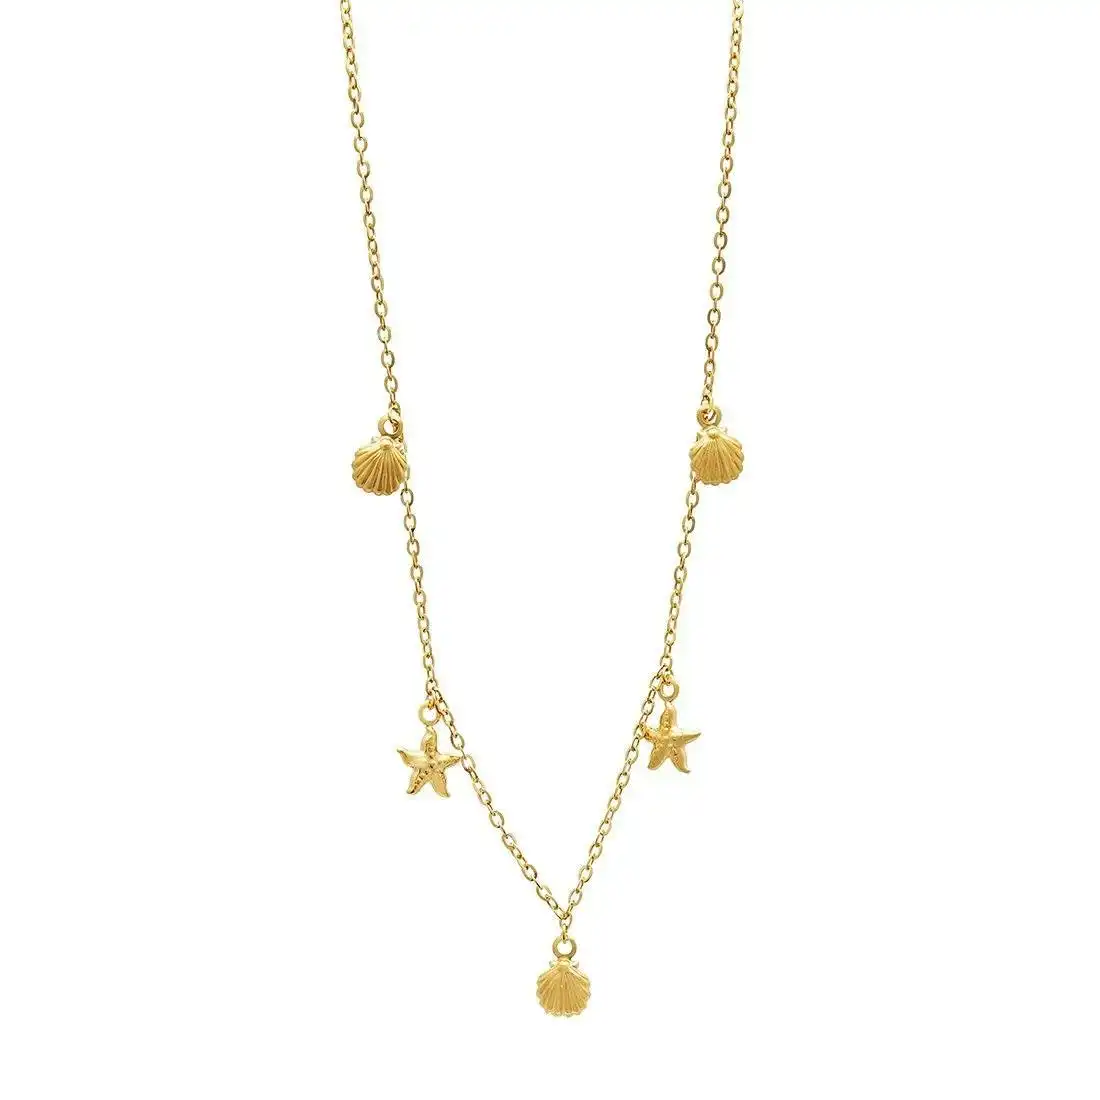 Children's Starfish & Shells Necklace in 9ct Yellow Gold Silver Infused